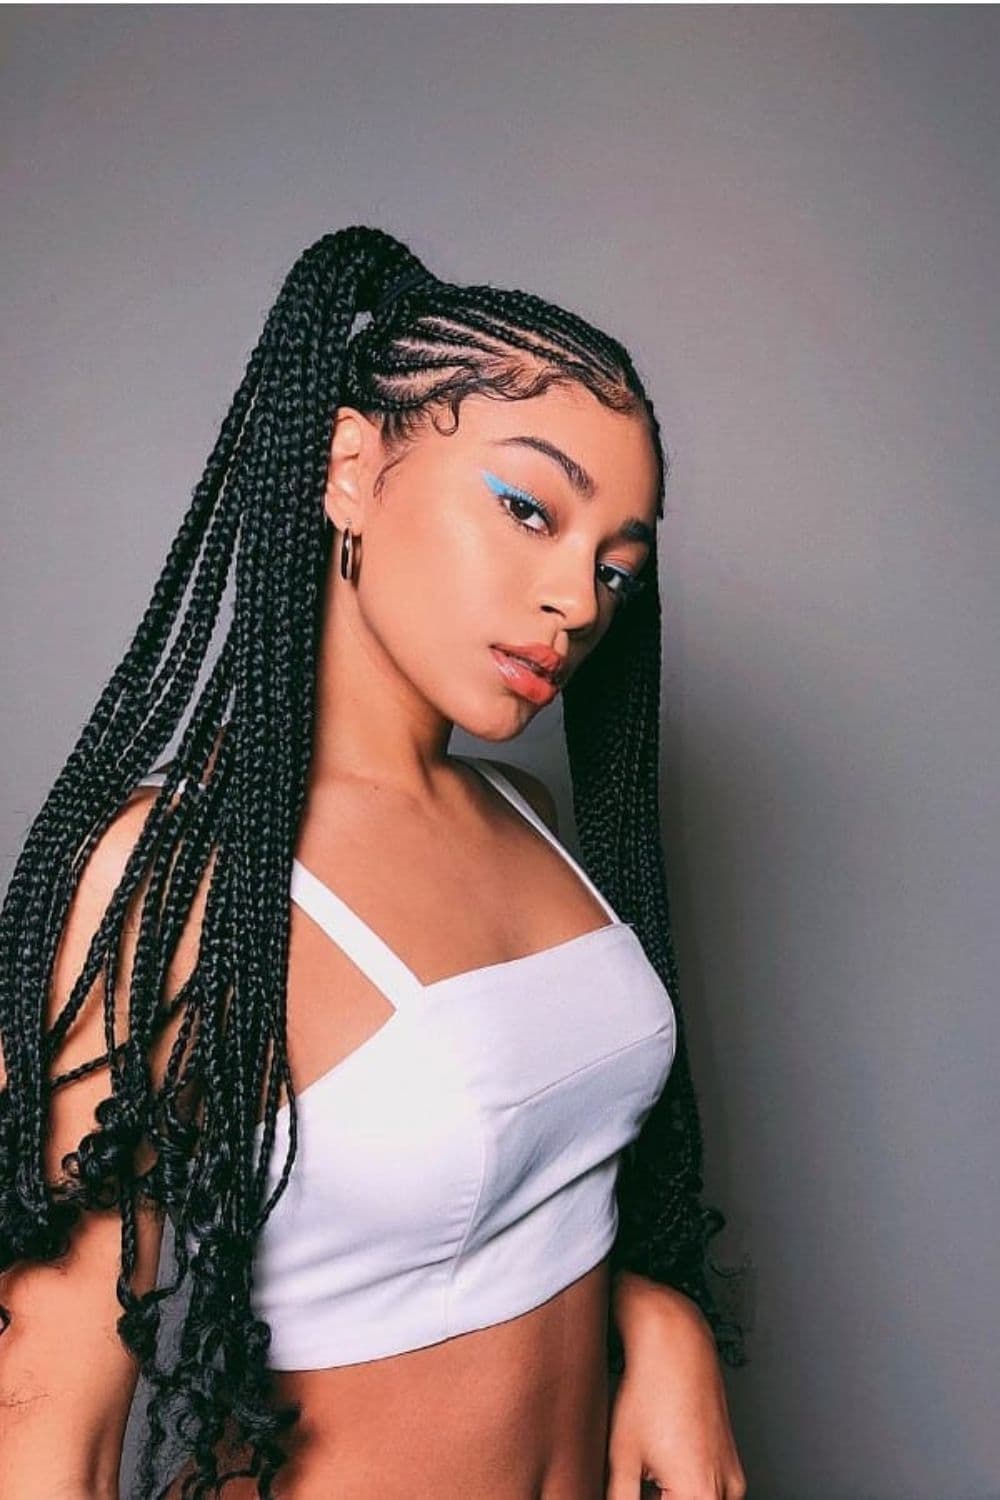 Side view of a woman with a white sleeveless crop top with black box braids with pig tails with curly ends.